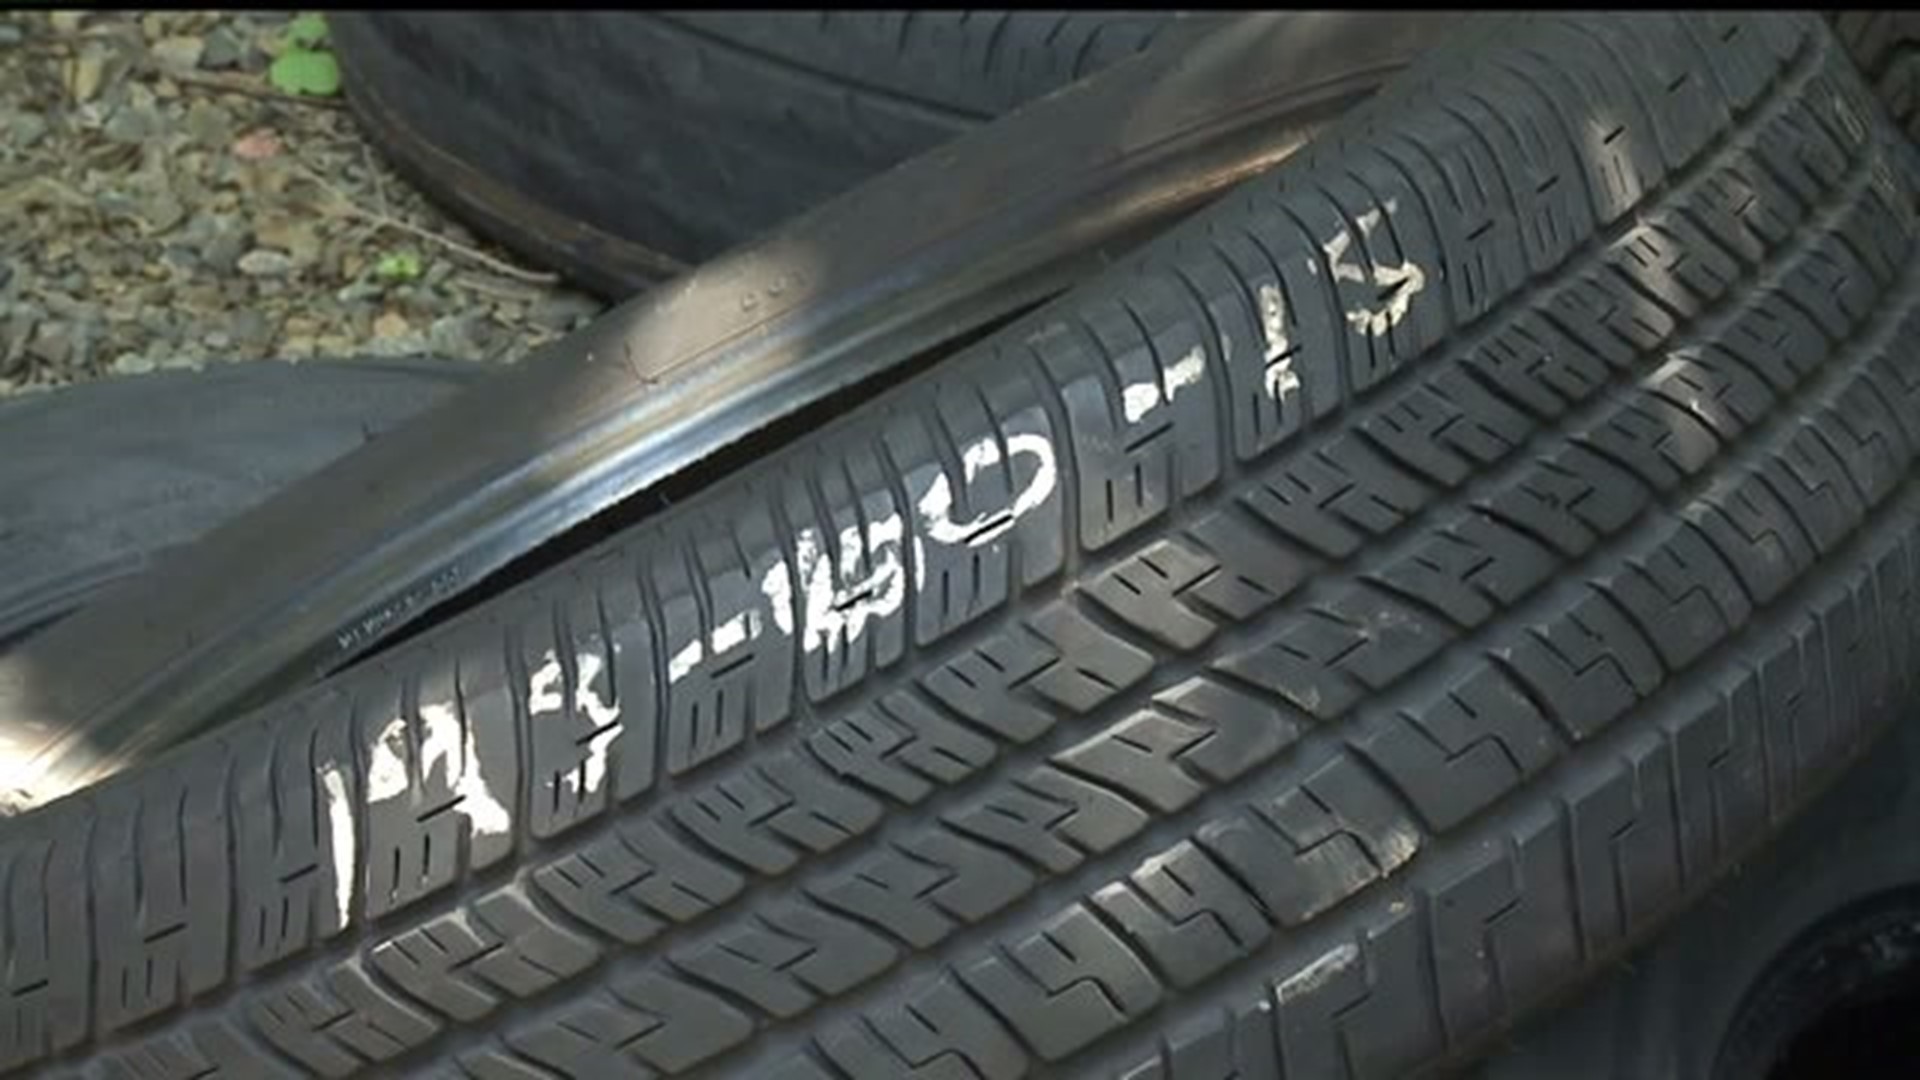 Perry County Animal Rescue director outraged after illegal dumping of tires